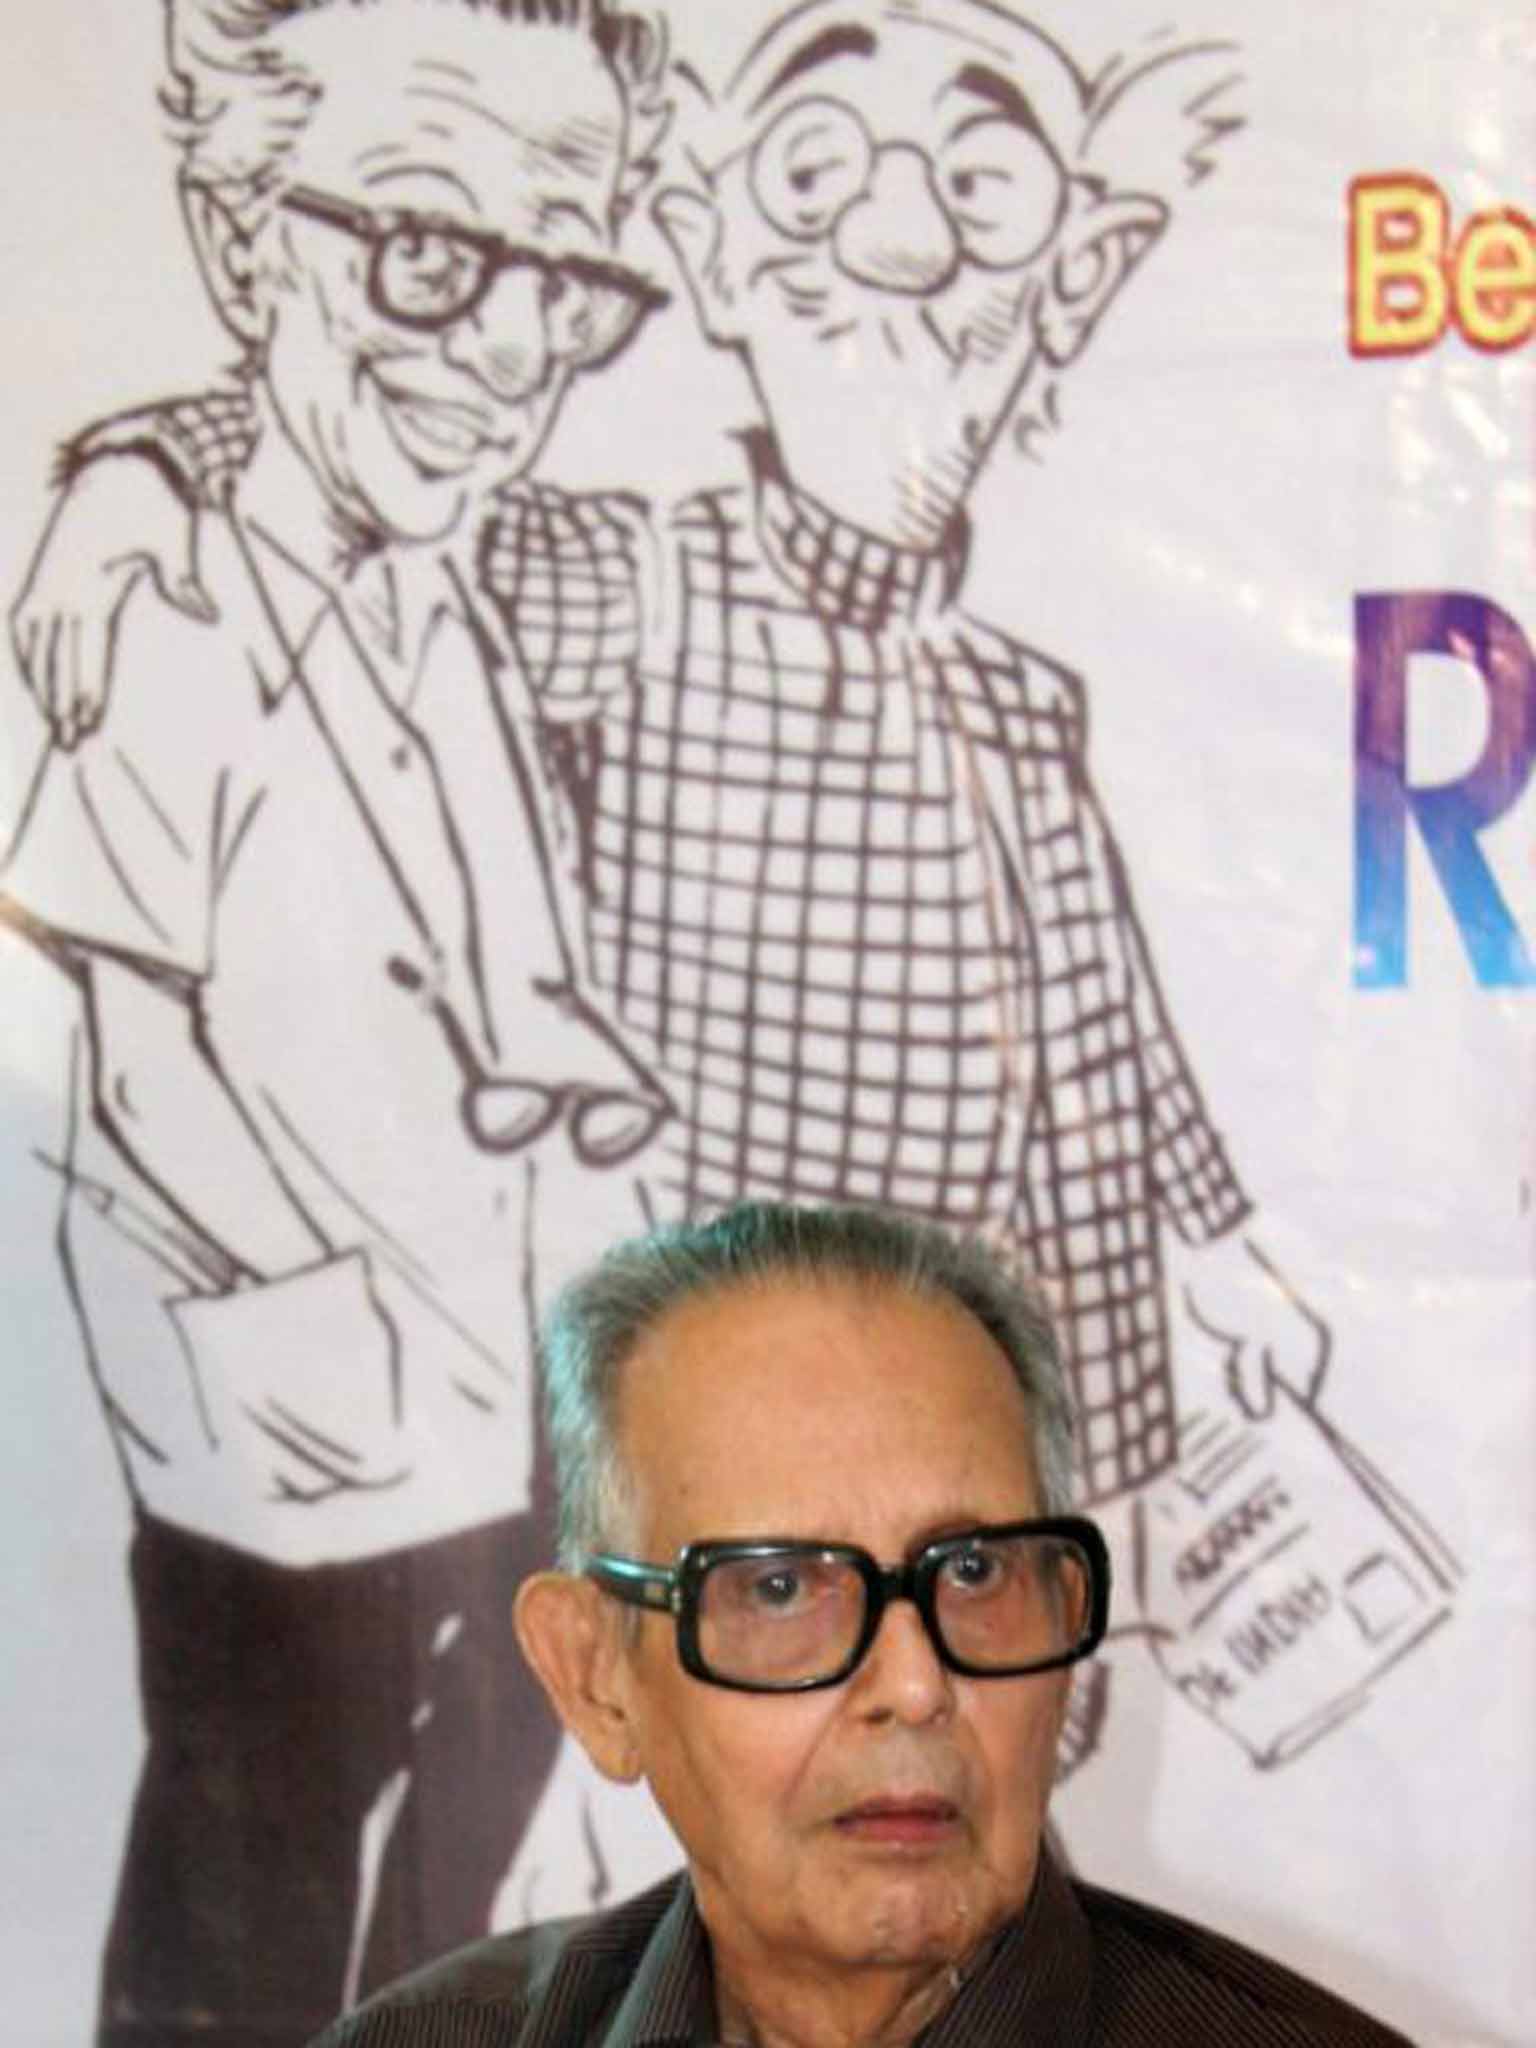 Laxman in front of a depiction of his most famous creation, The Common Man, in the check shirt